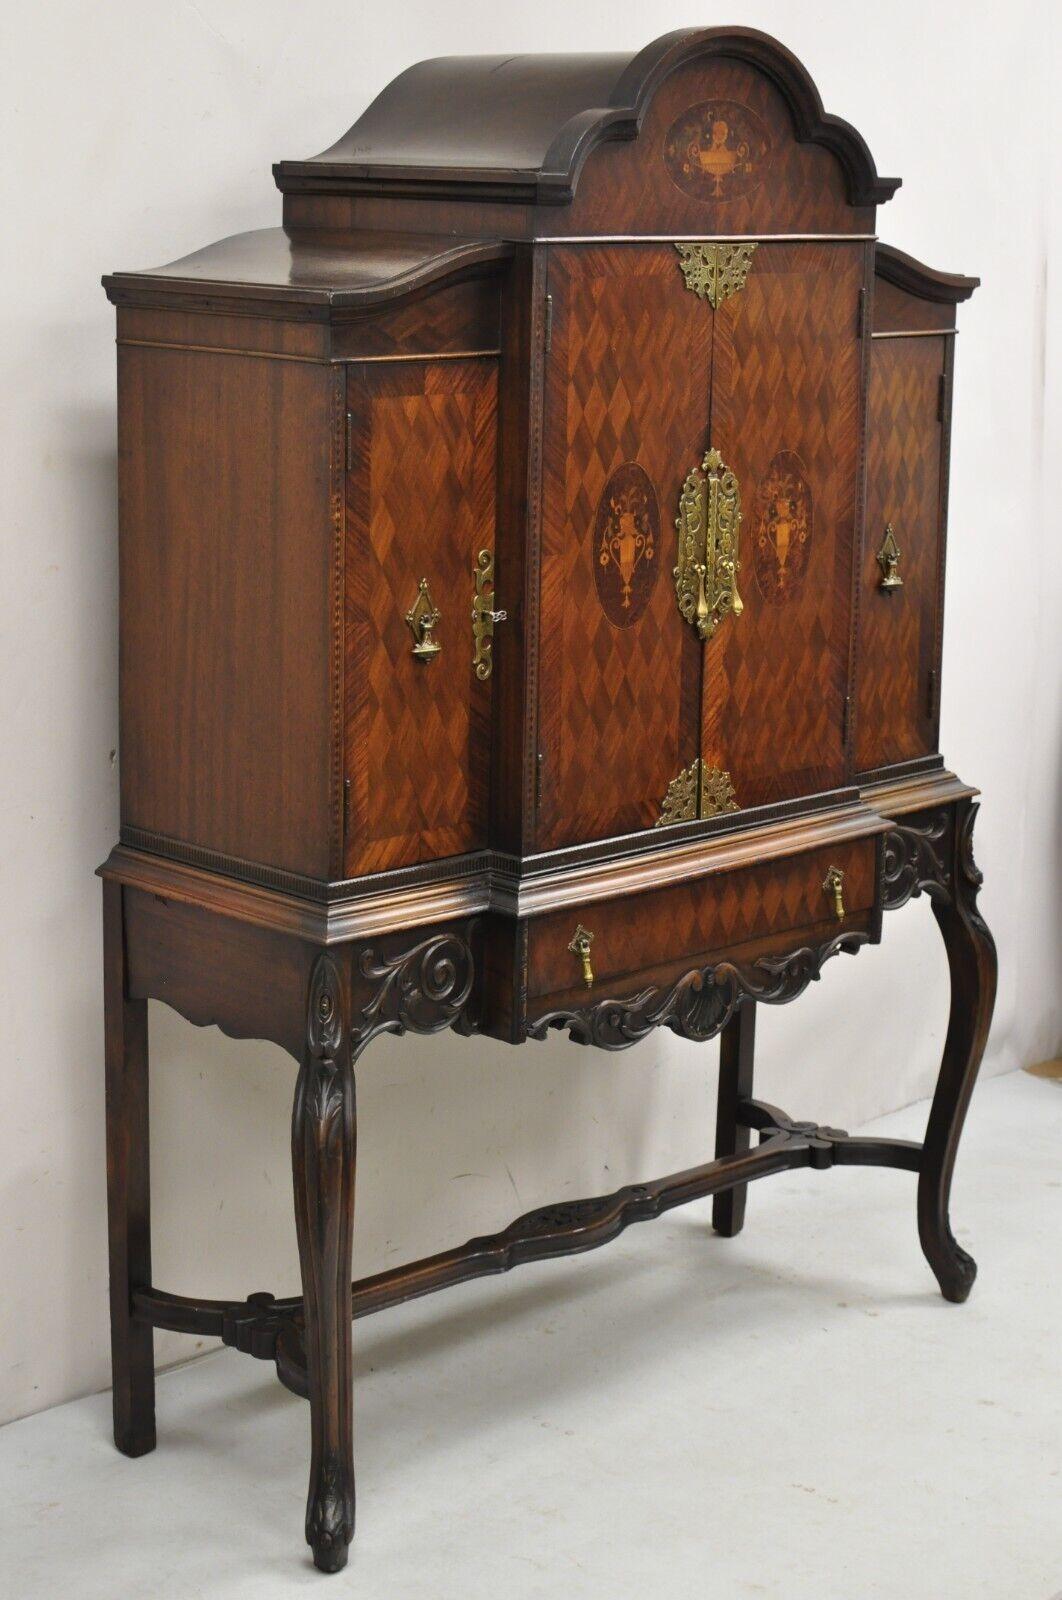 Antique French Renaissance Carved and Inlaid Walnut Record China Cabinet Curio. Item features brass hardware, beautiful inlay, raised on carved legs with stretcher support, 4 swing doors and 1 drawer. Item was originally a radio/record cabinet with